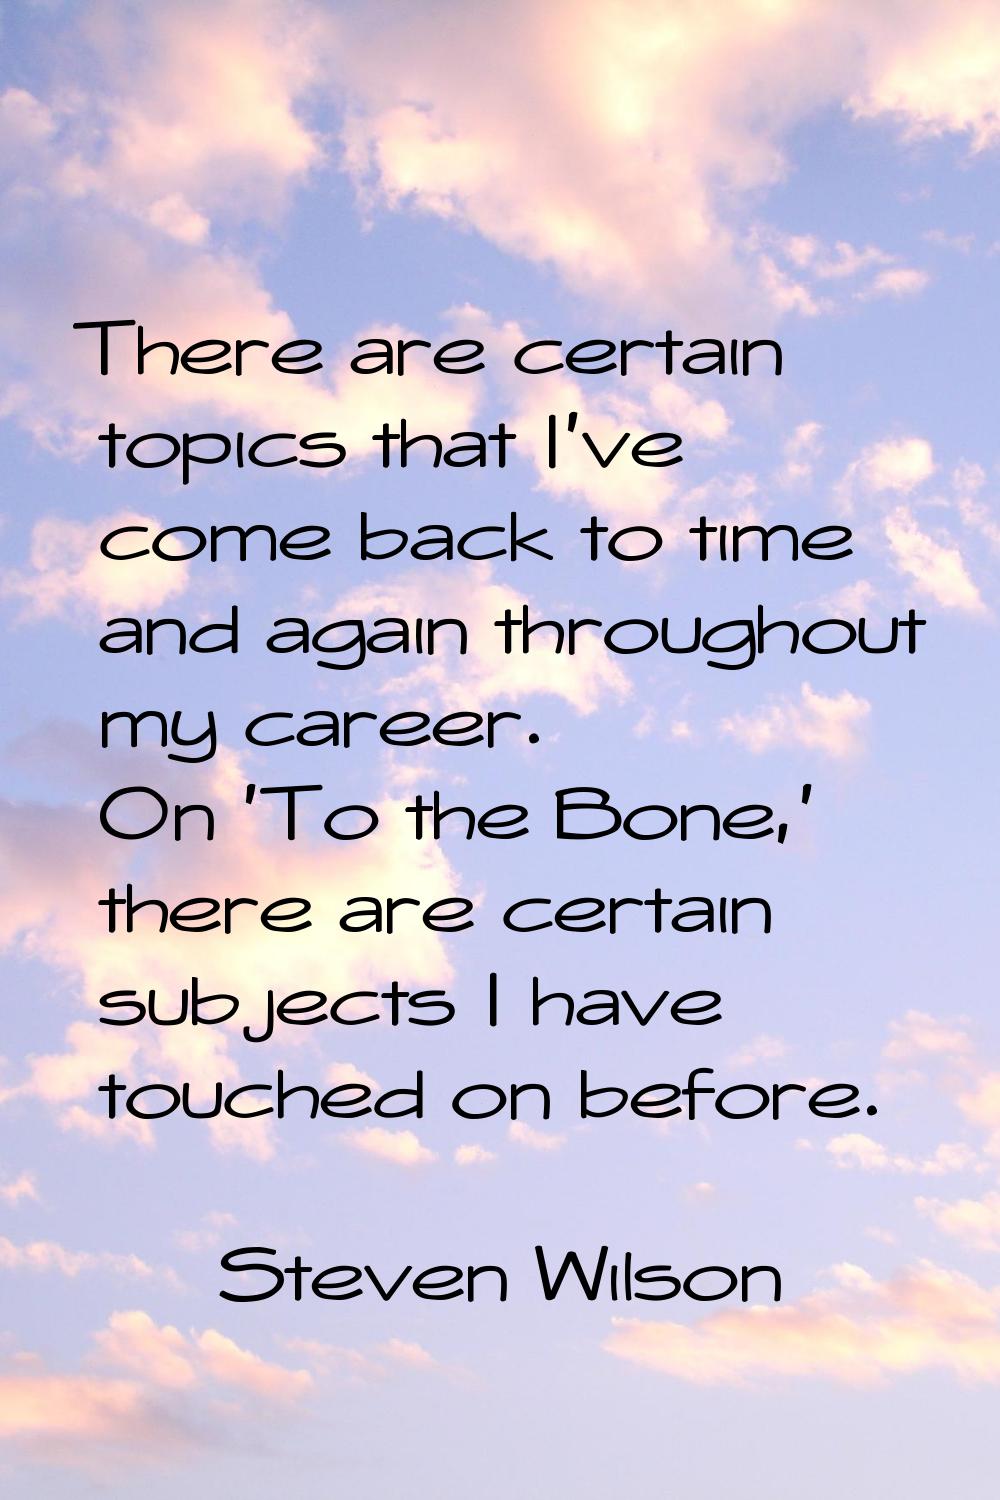 There are certain topics that I've come back to time and again throughout my career. On 'To the Bon